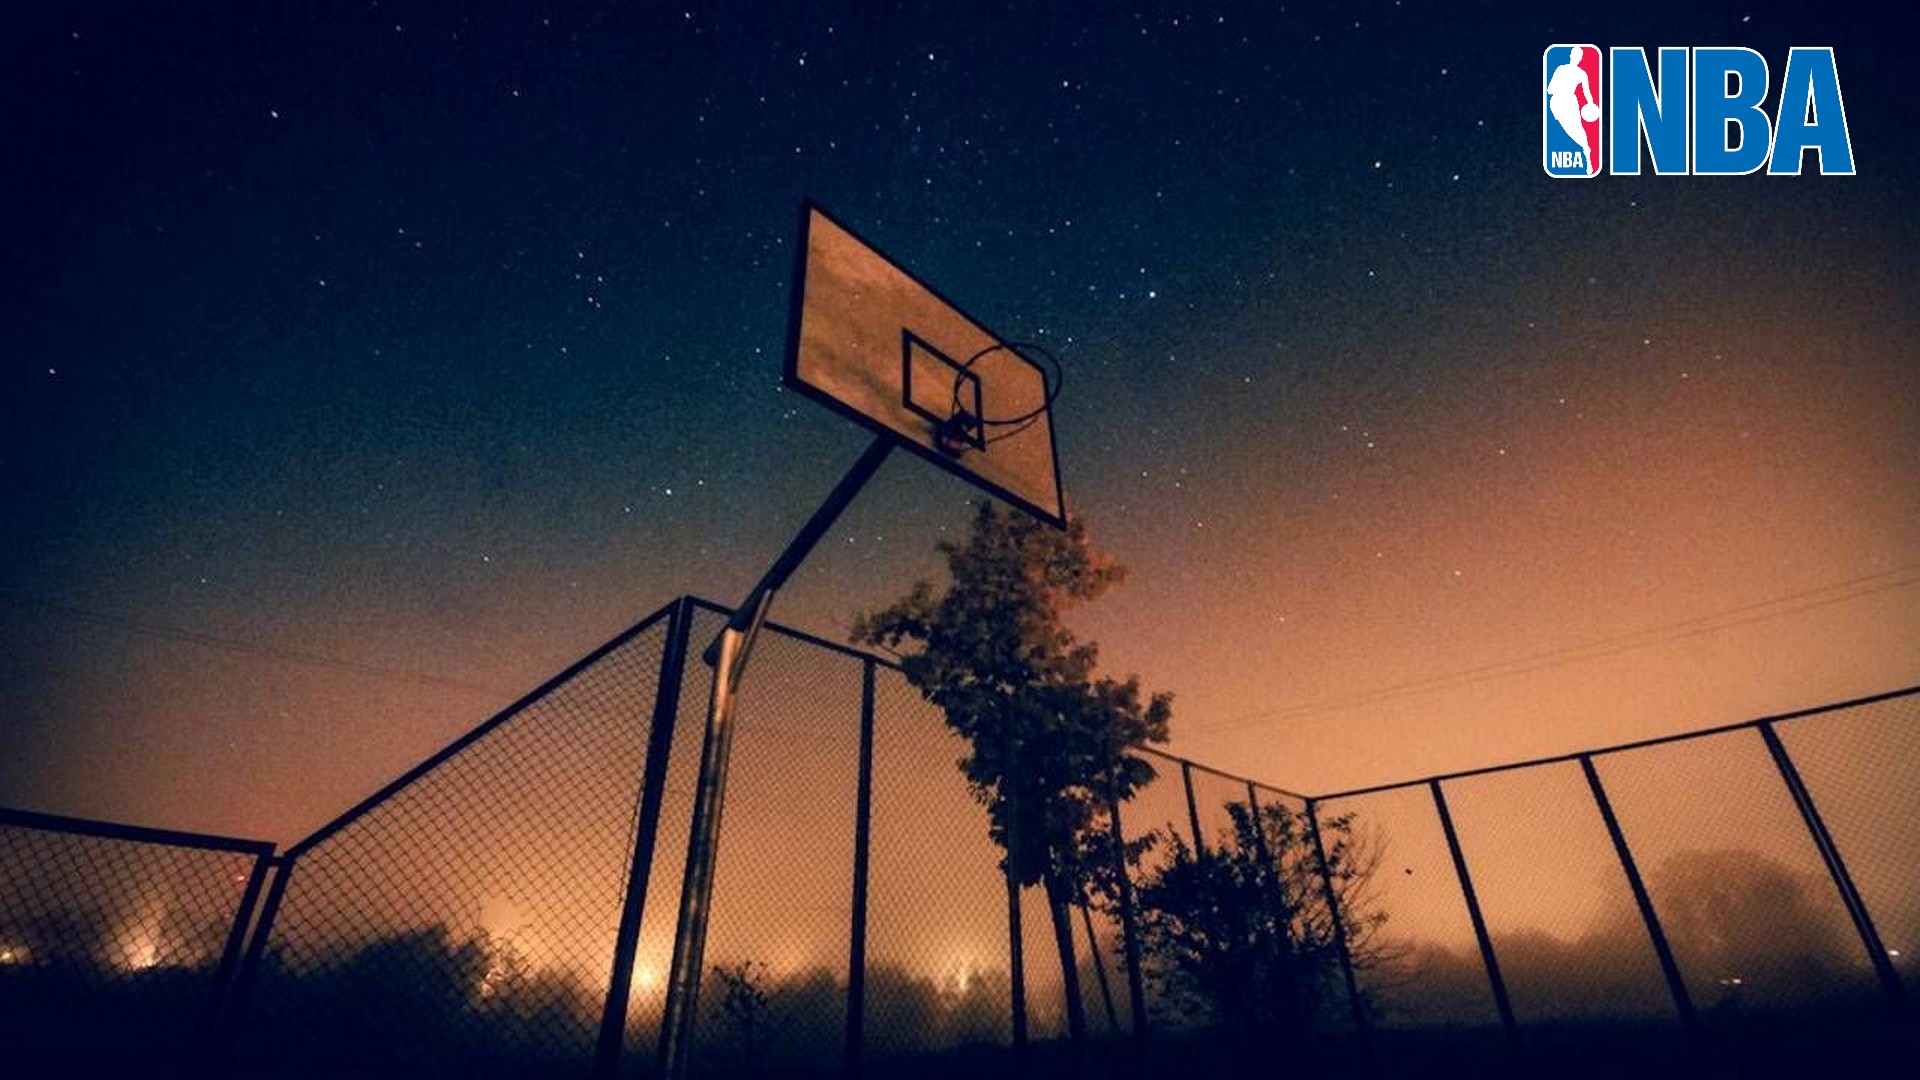 Basketball Court Wallpaper with image dimensions 1920x1080 pixel. You can make this wallpaper for your Desktop Computer Backgrounds, Windows or Mac Screensavers, iPhone Lock screen, Tablet or Android and another Mobile Phone device